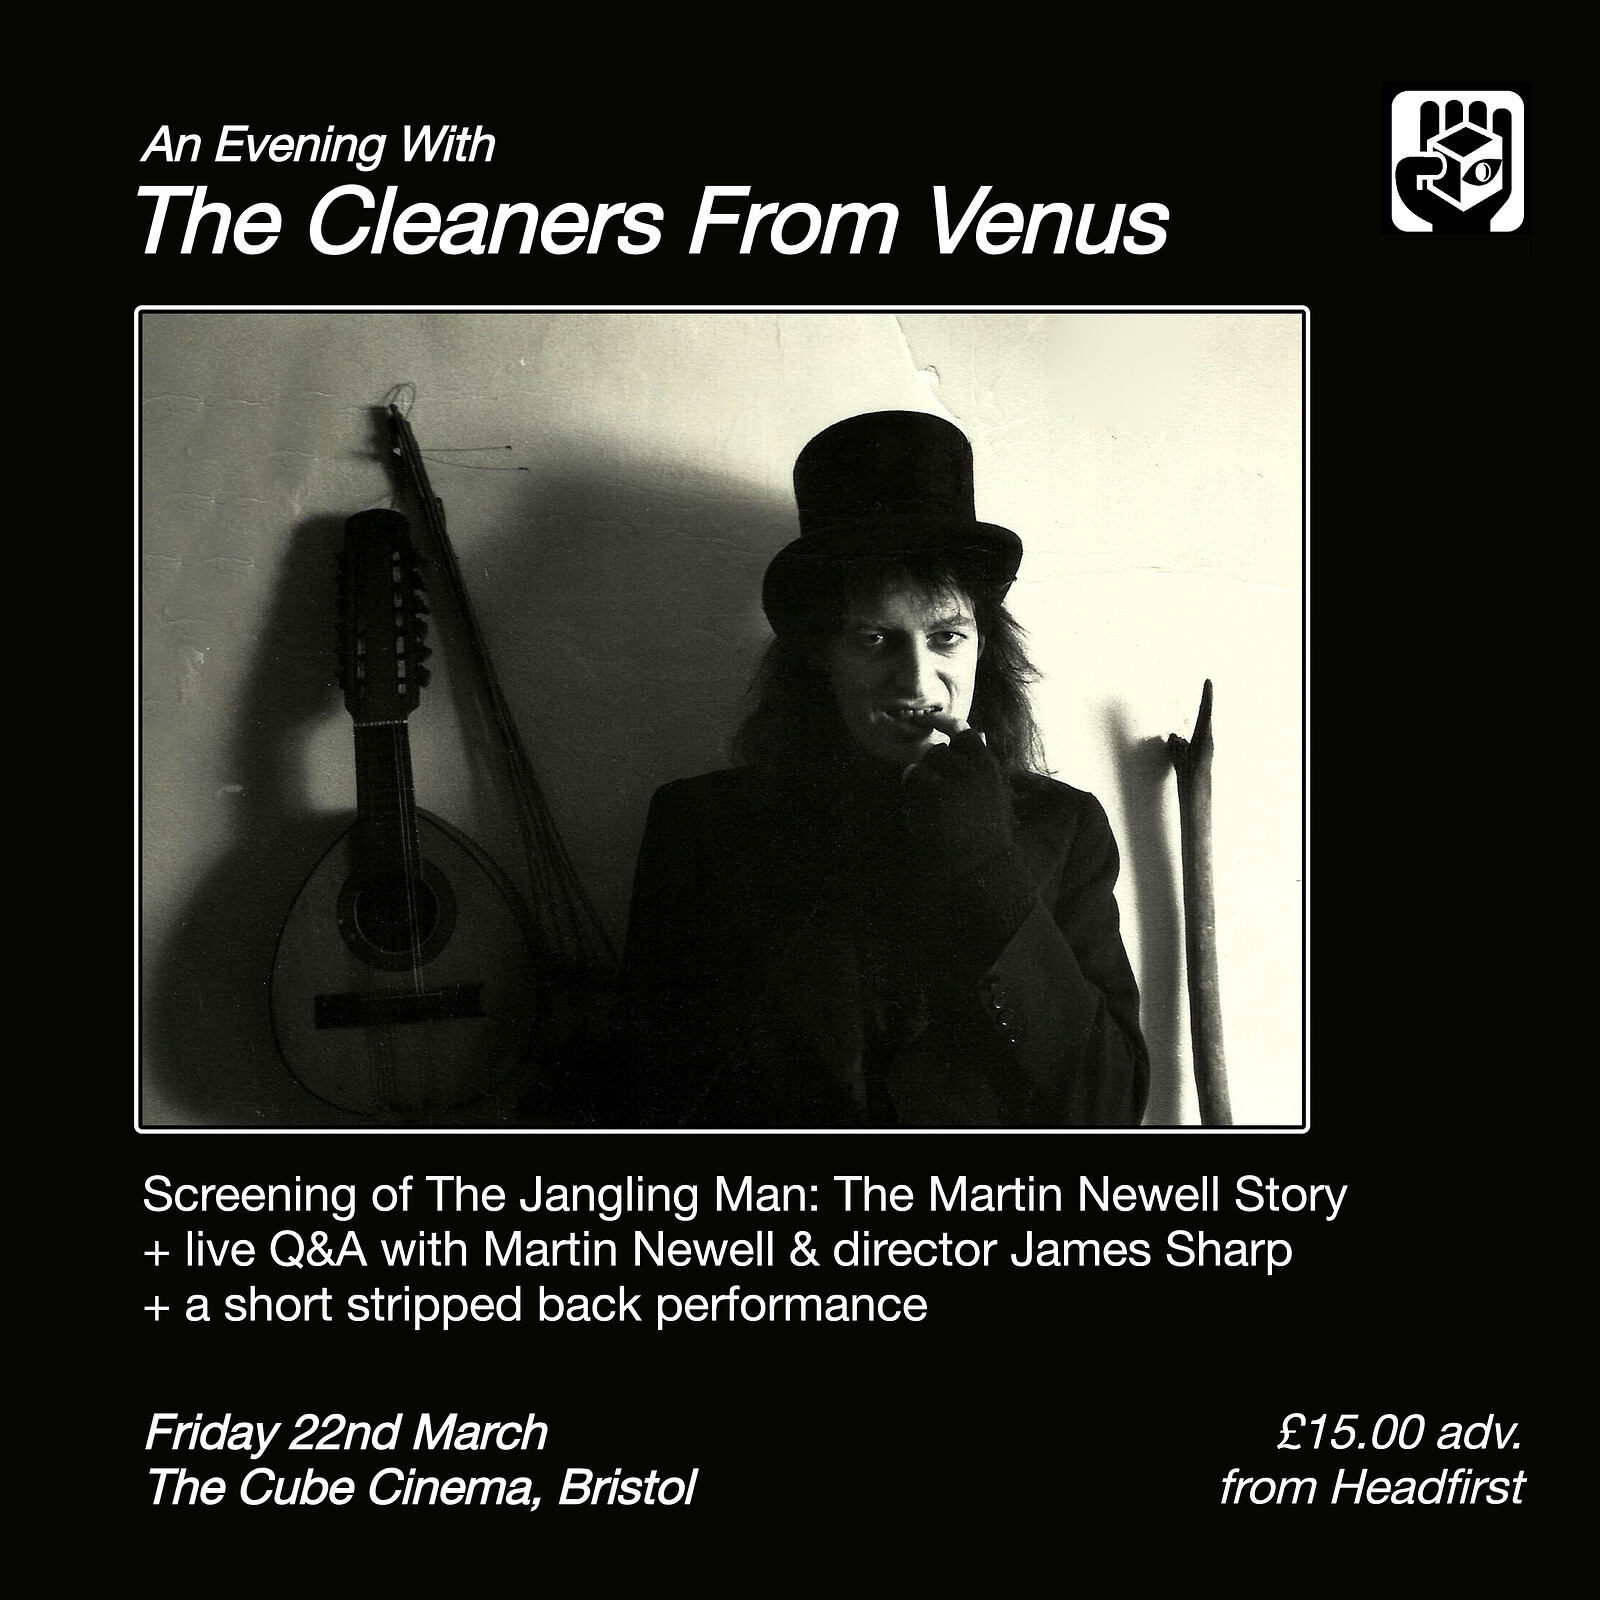 An Evening With The Cleaners From Venus at The Cube